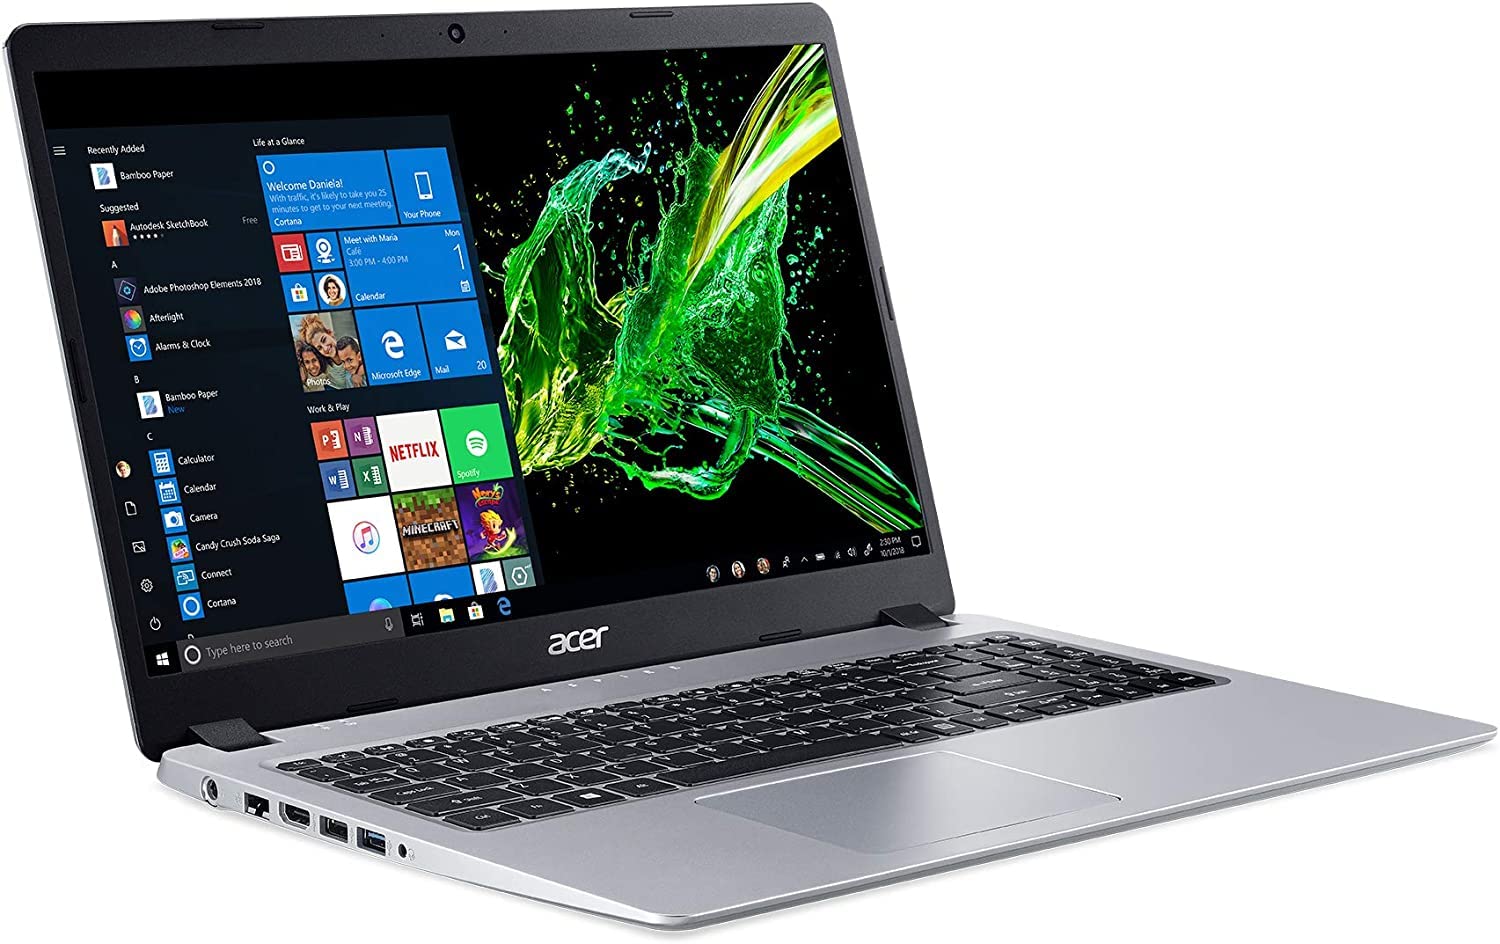 acer Newest Aspire 5 15.6